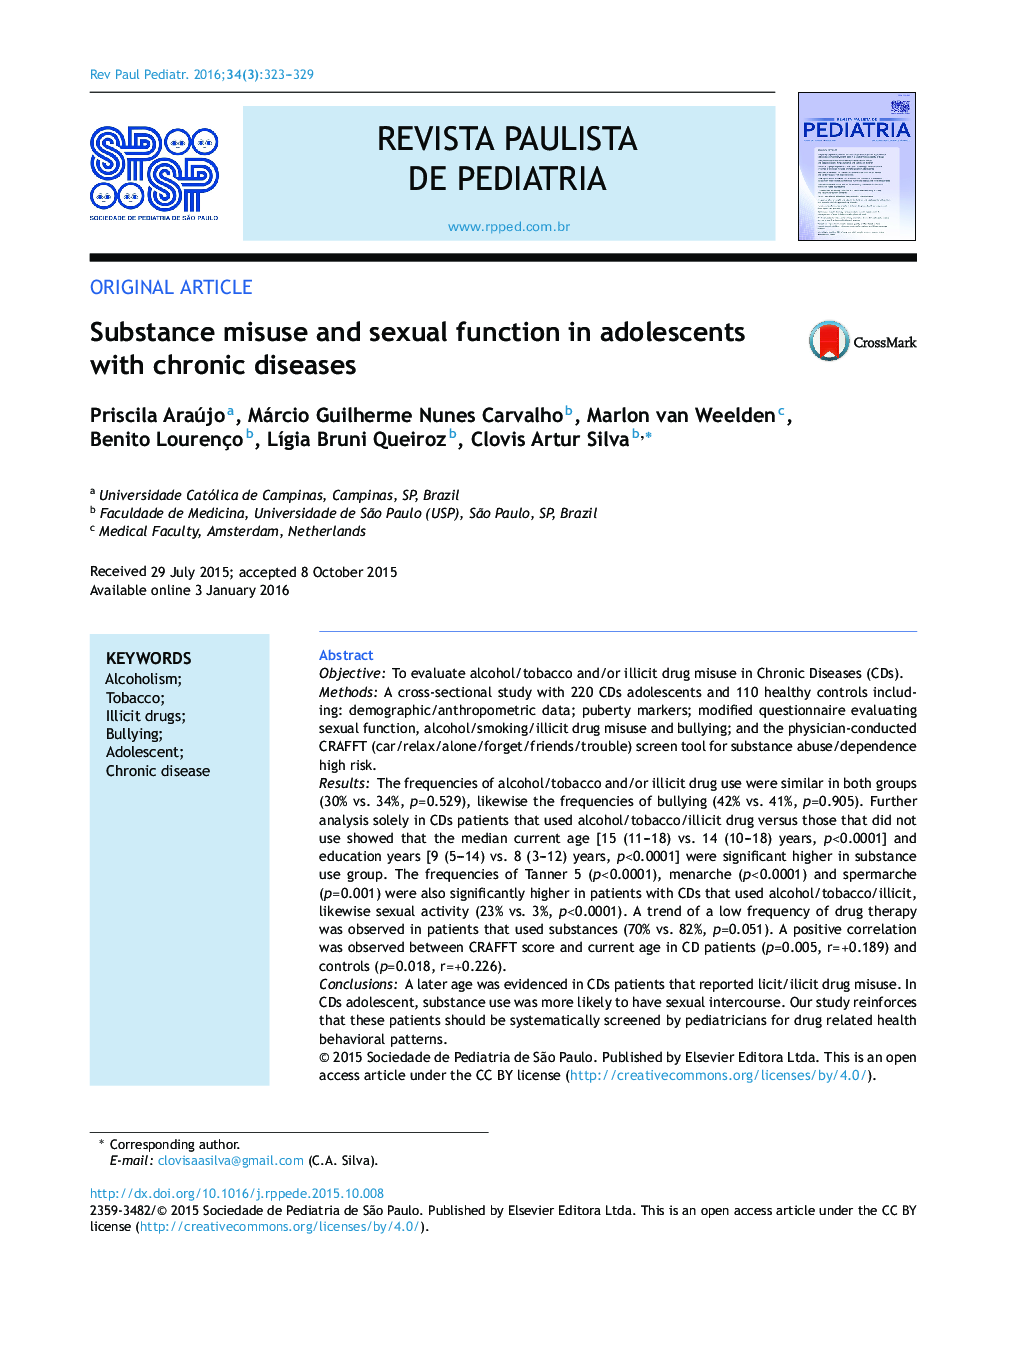 Substance misuse and sexual function in adolescents with chronic diseases